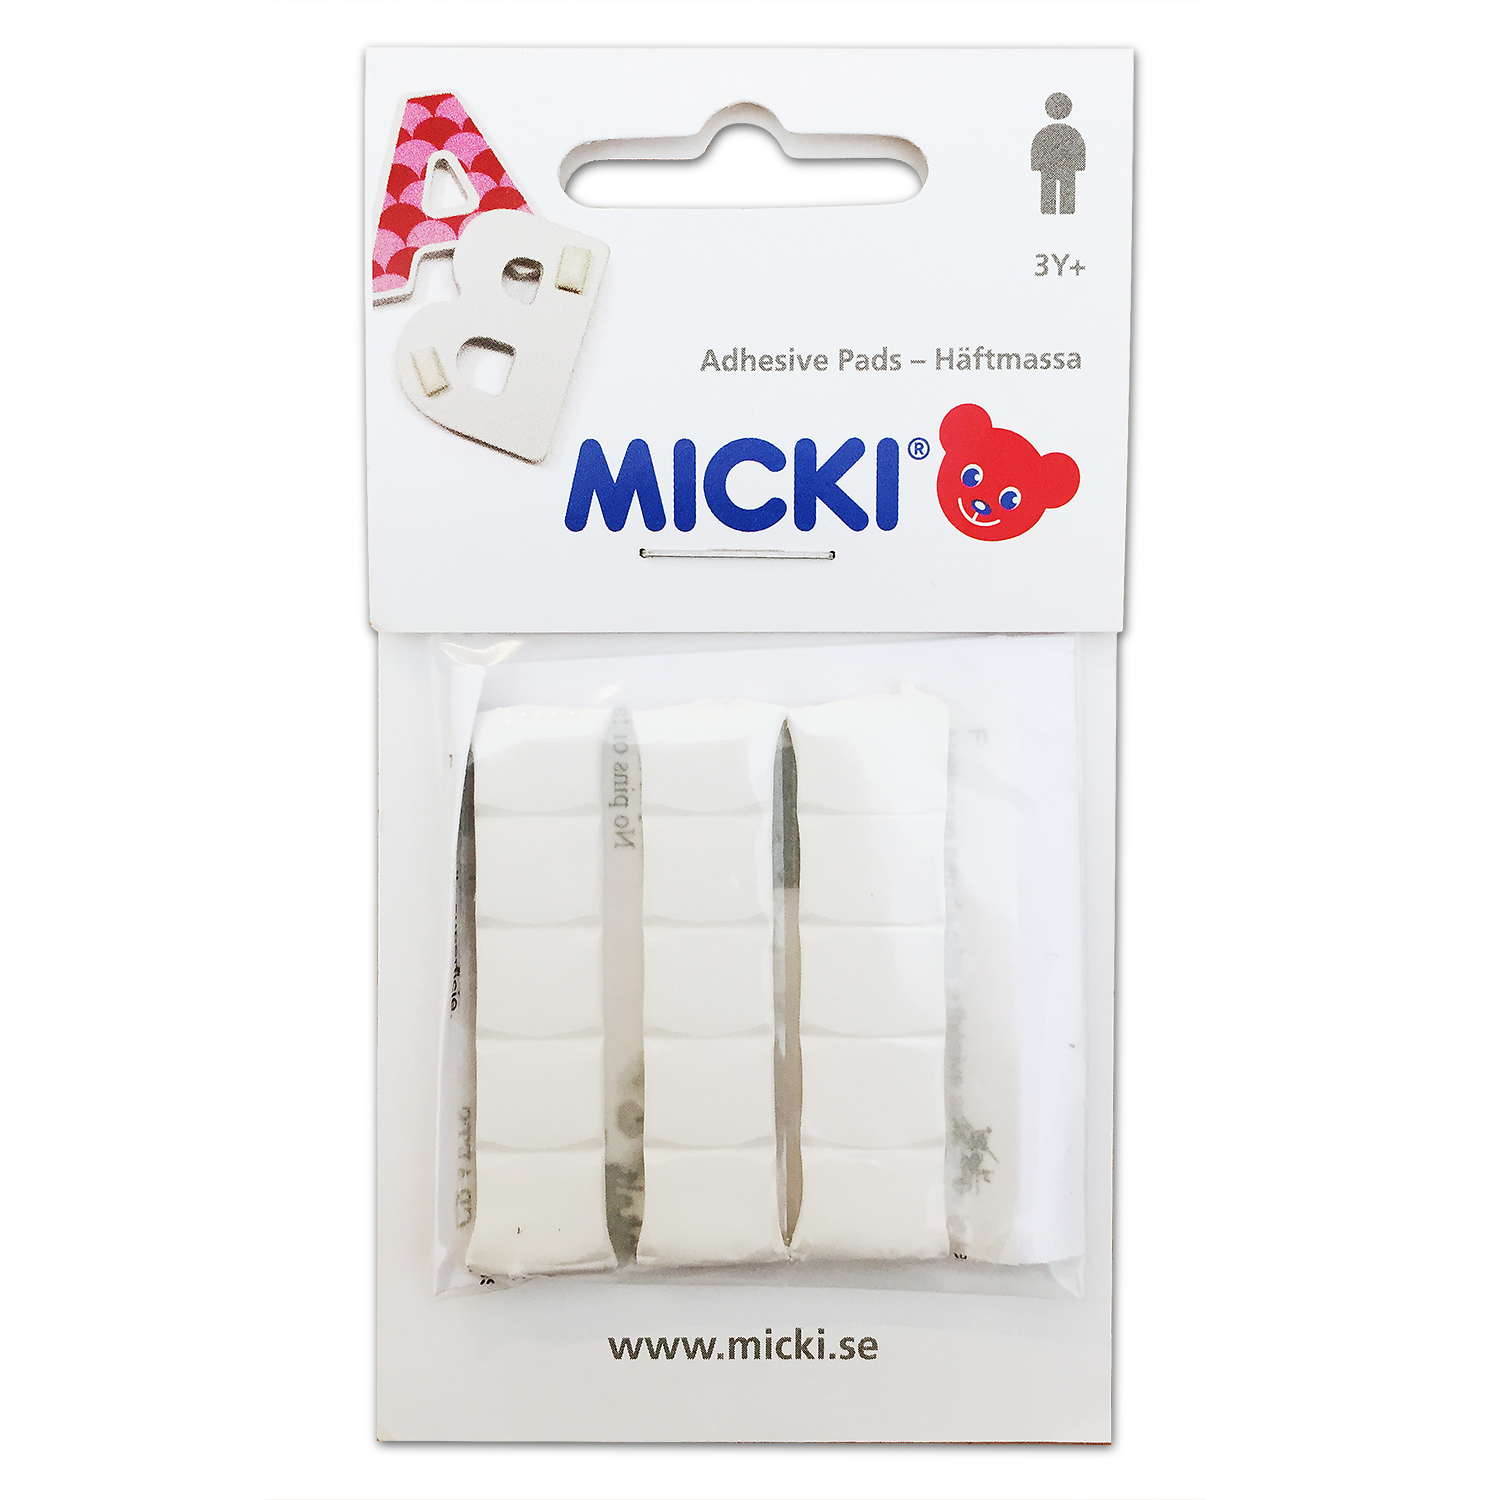 Micki micki adhesive pads for decorative letters